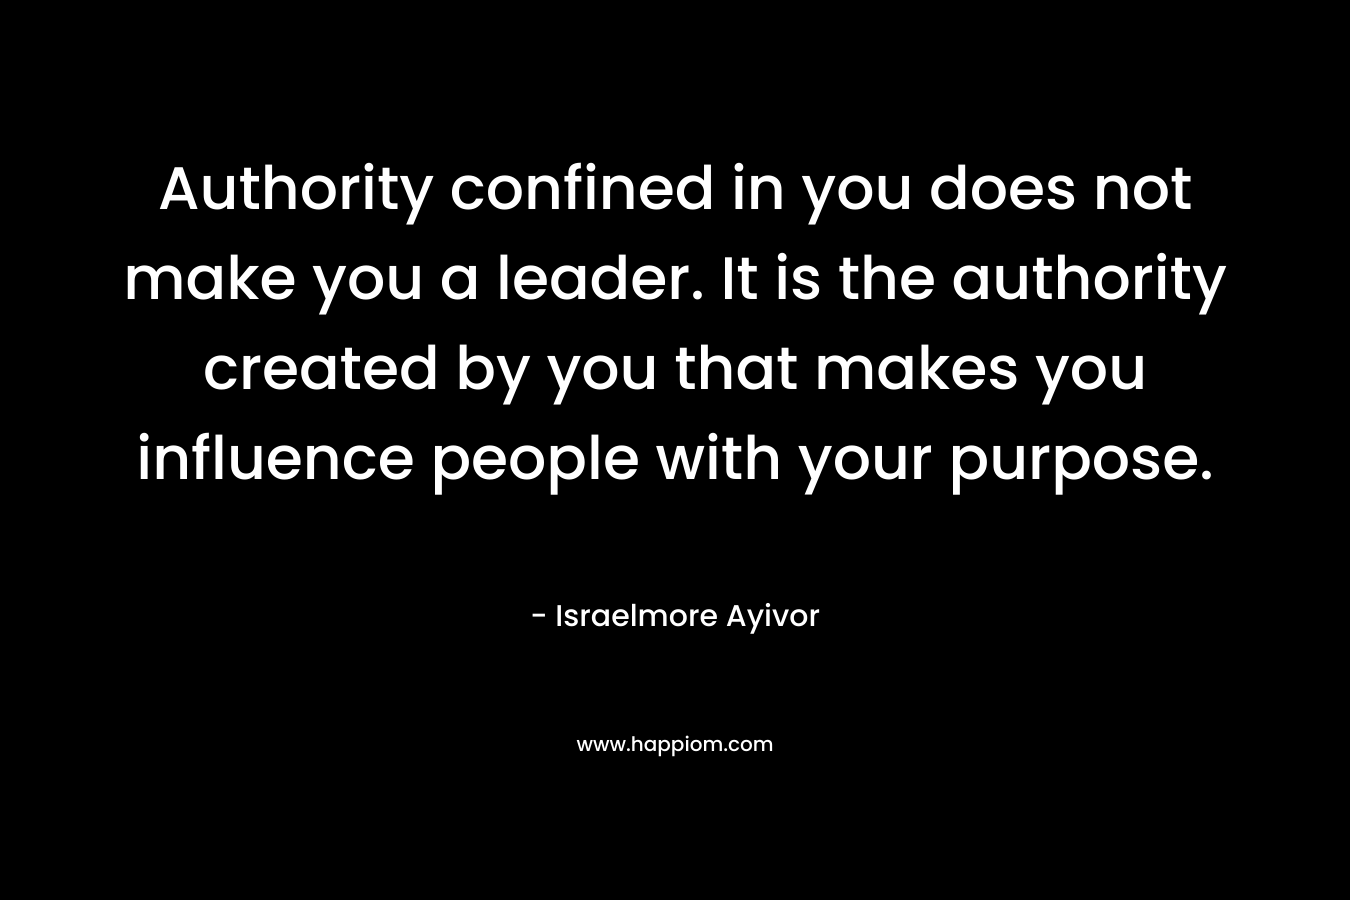 Authority confined in you does not make you a leader. It is the authority created by you that makes you influence people with your purpose.